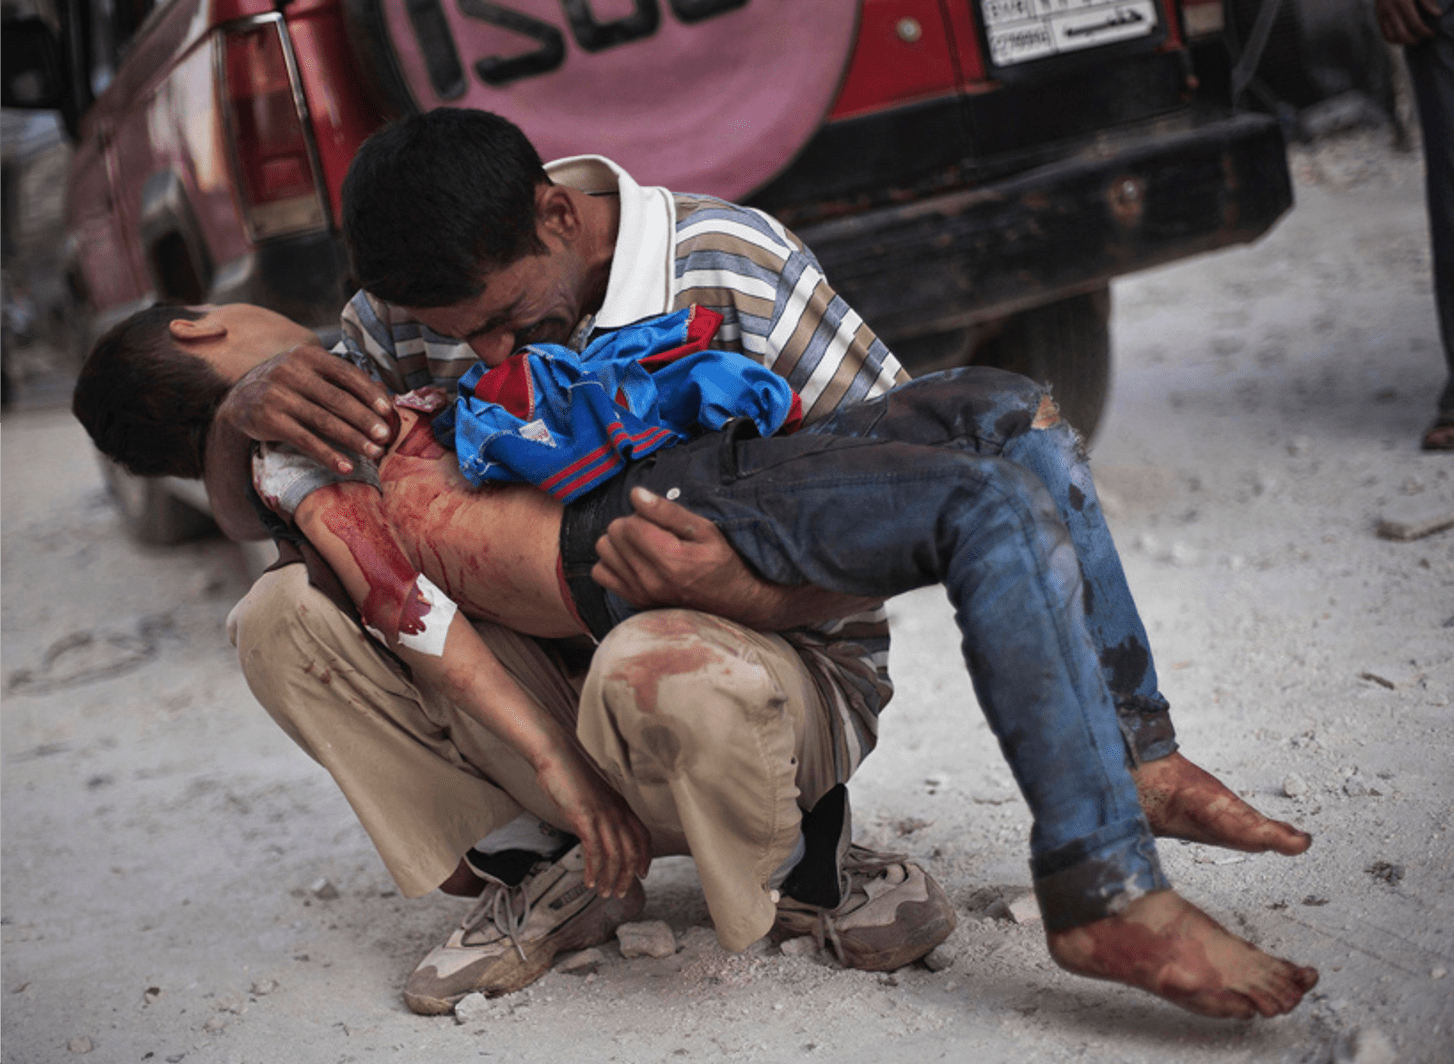 Pulitzer-Winning Photos: A Syrian man cries while holding the body of his son near Dar El Shifa hospital in Aleppo, Syria, Oct. 3, 2012. The boy was killed by the Syrian army. (Manu Brabo, Associated Press - October 3, 2012)